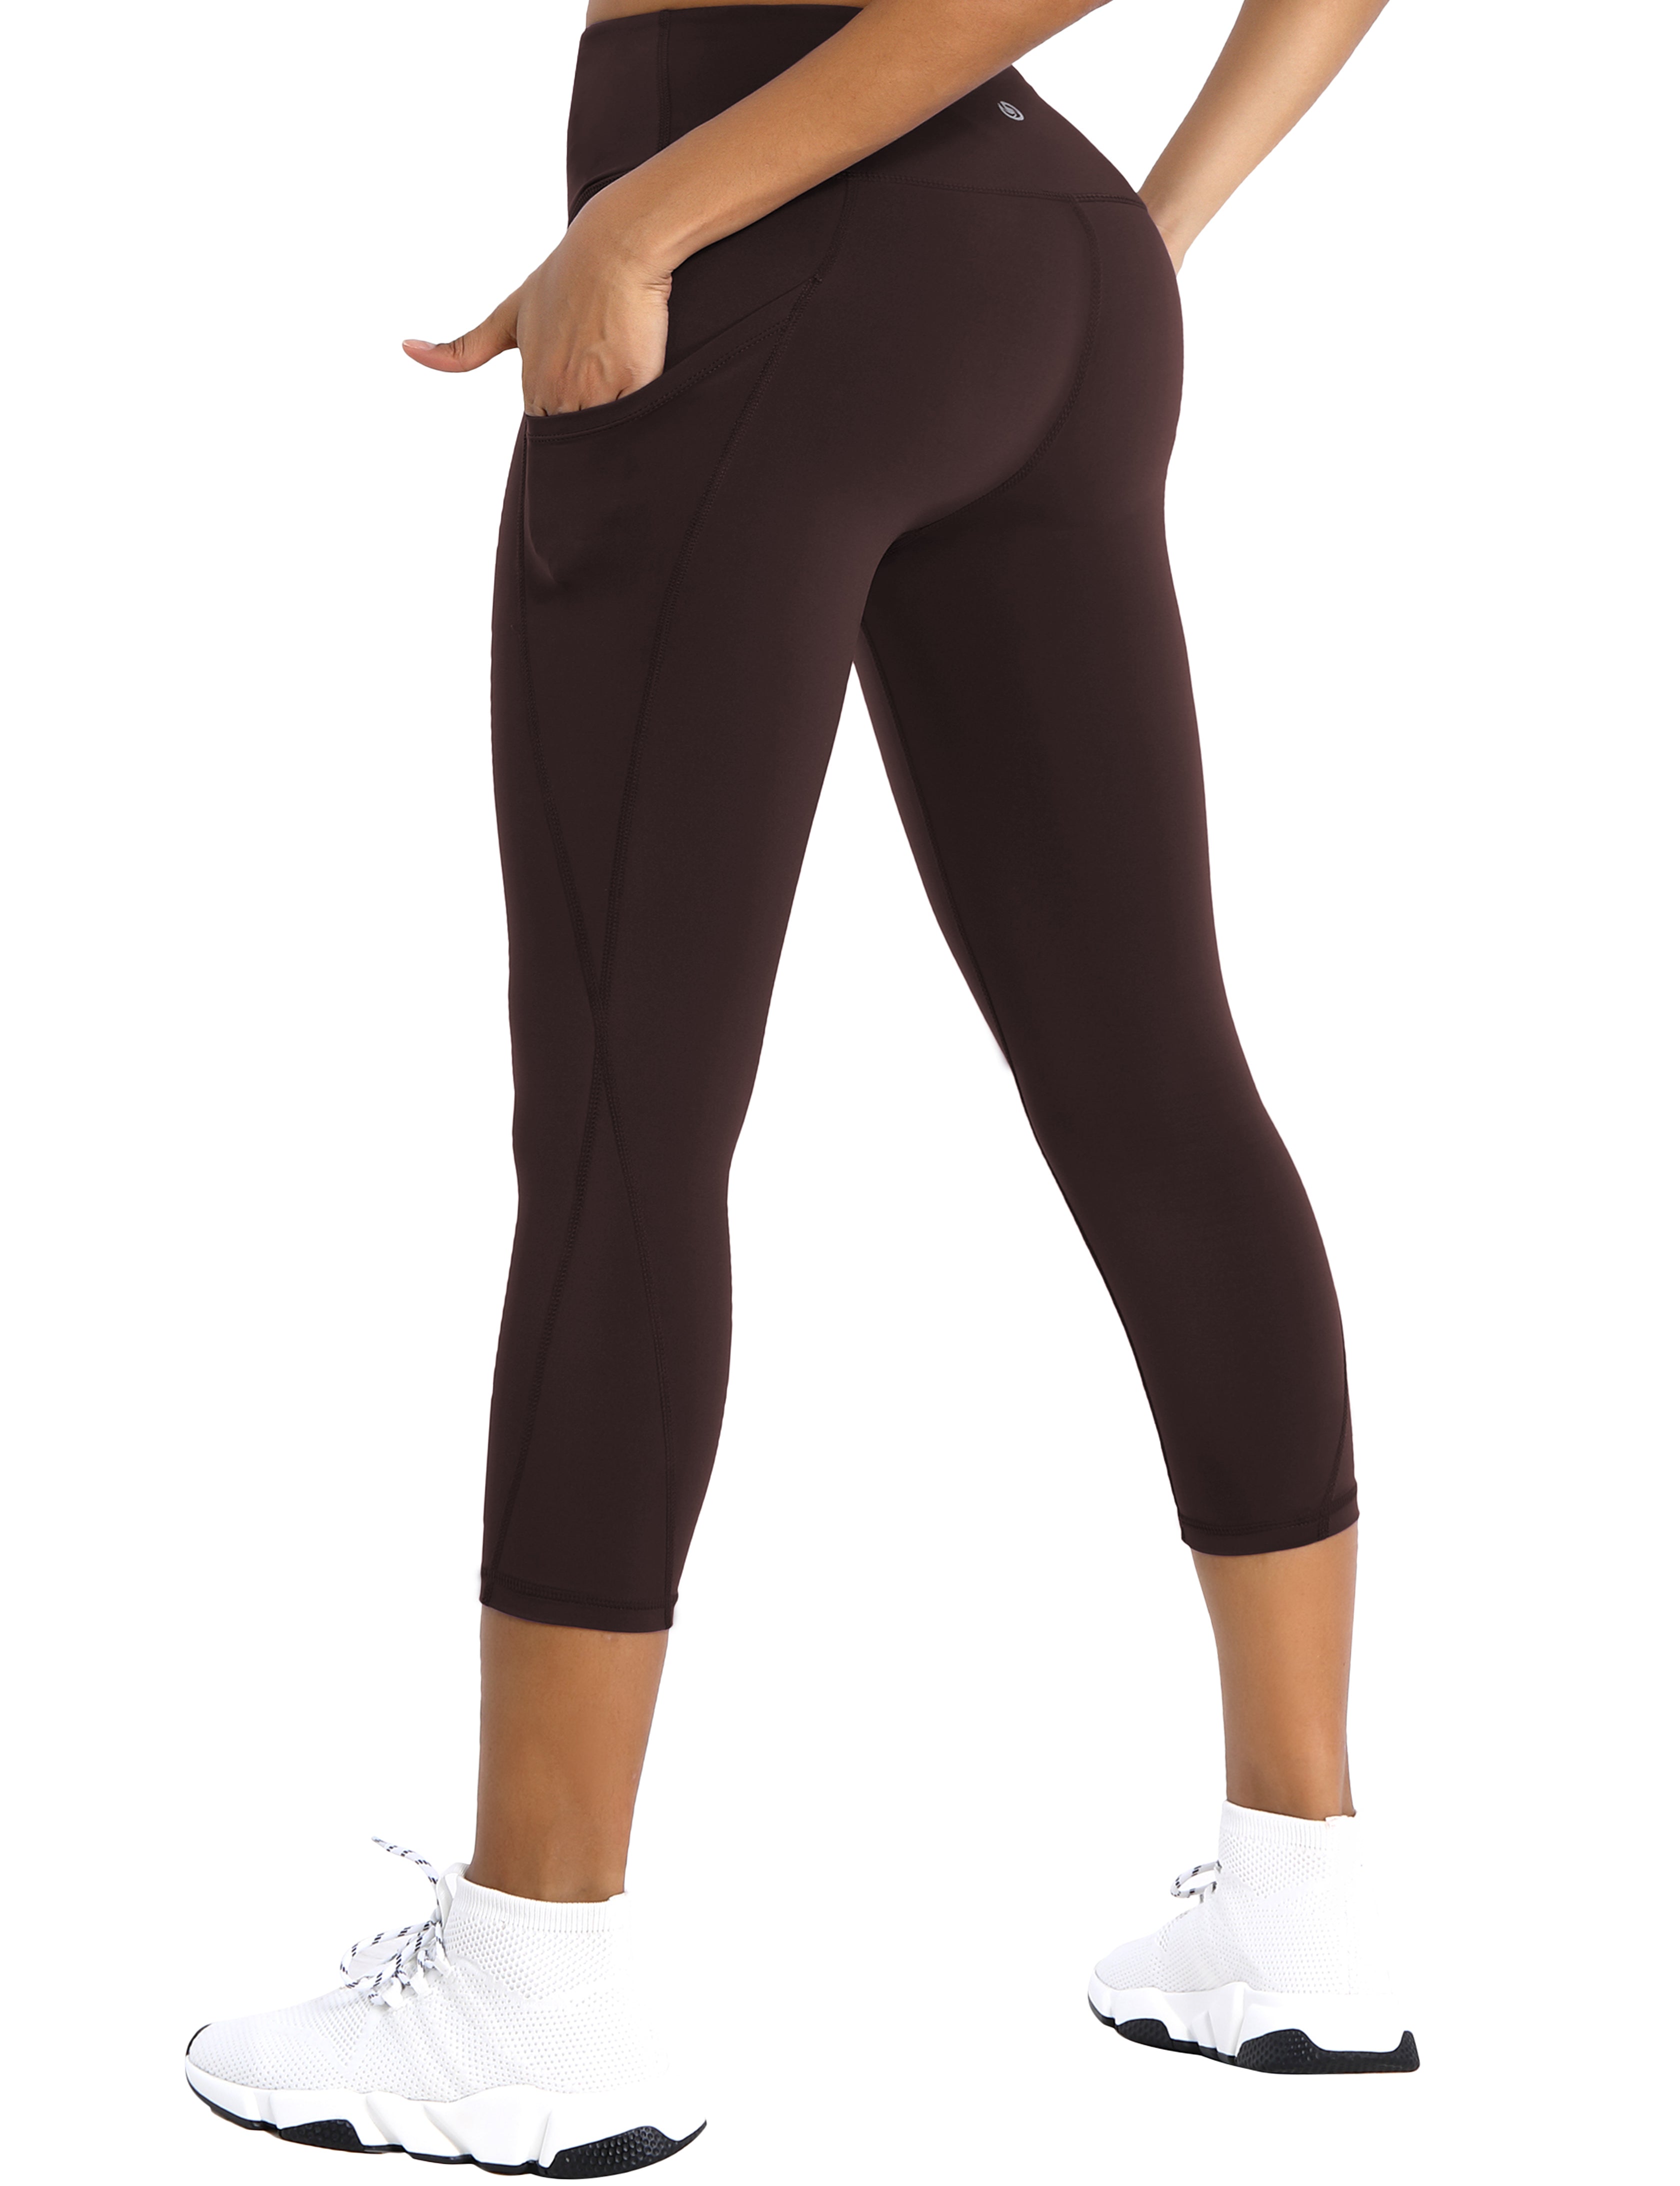 19" High Waist Side Pockets Capris mahoganymaroon 75%Nylon/25%Spandex Fabric doesn't attract lint easily 4-way stretch No see-through Moisture-wicking Tummy control Inner pocket